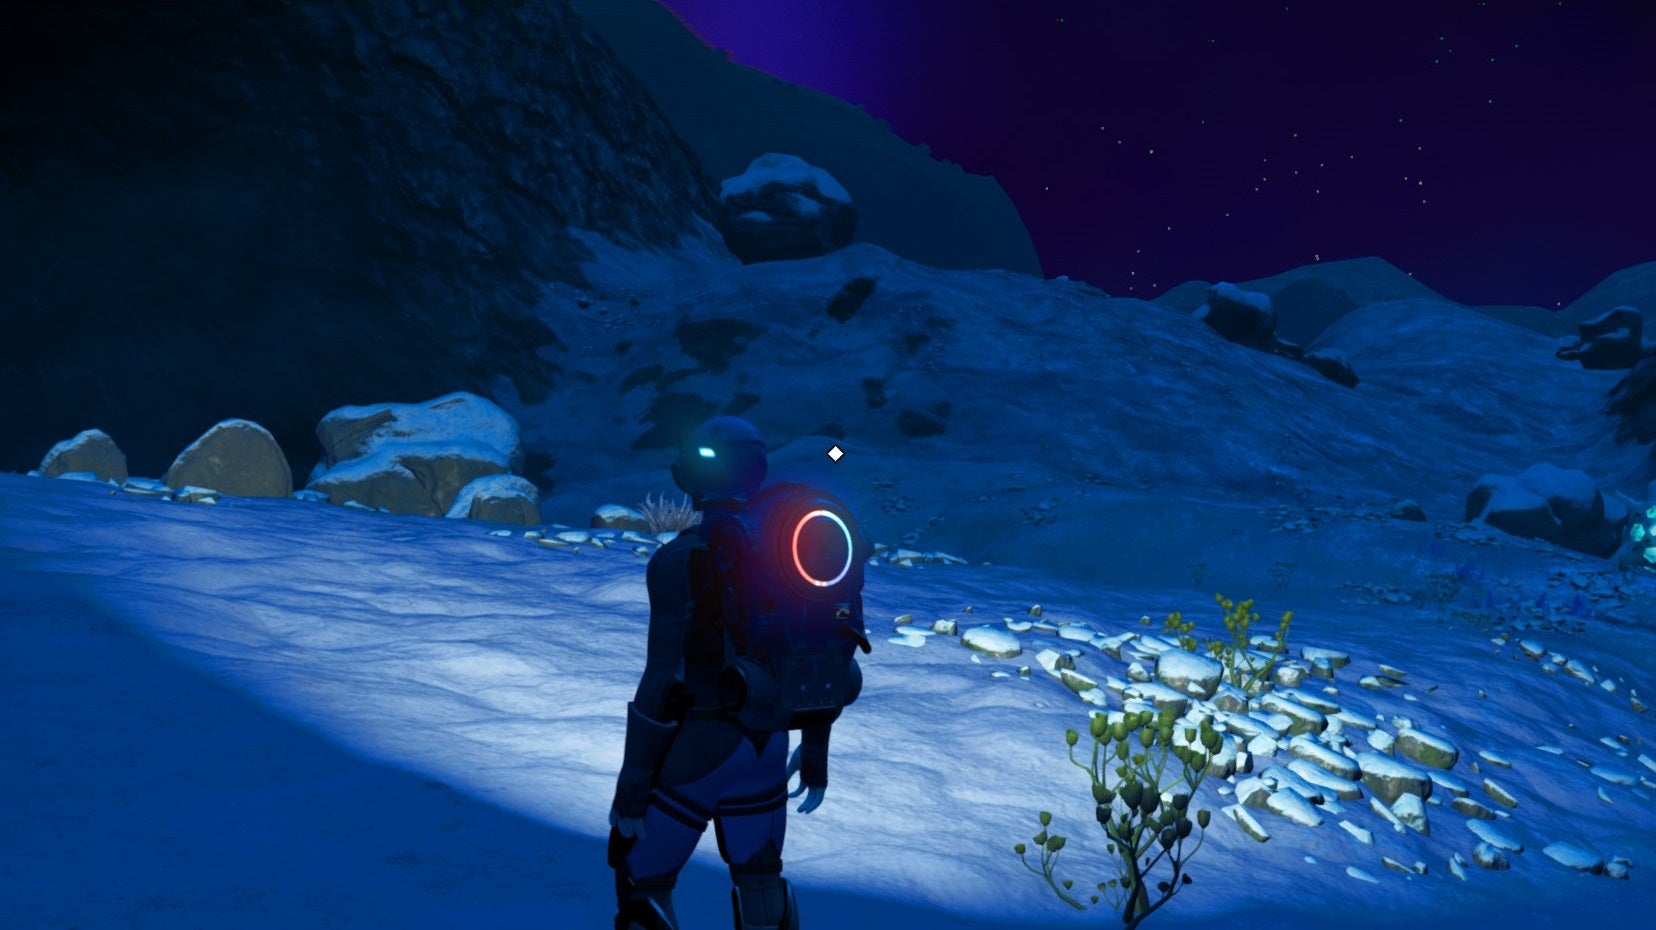 No Man's Sky - The player stands on a dark and snowy planet alone.